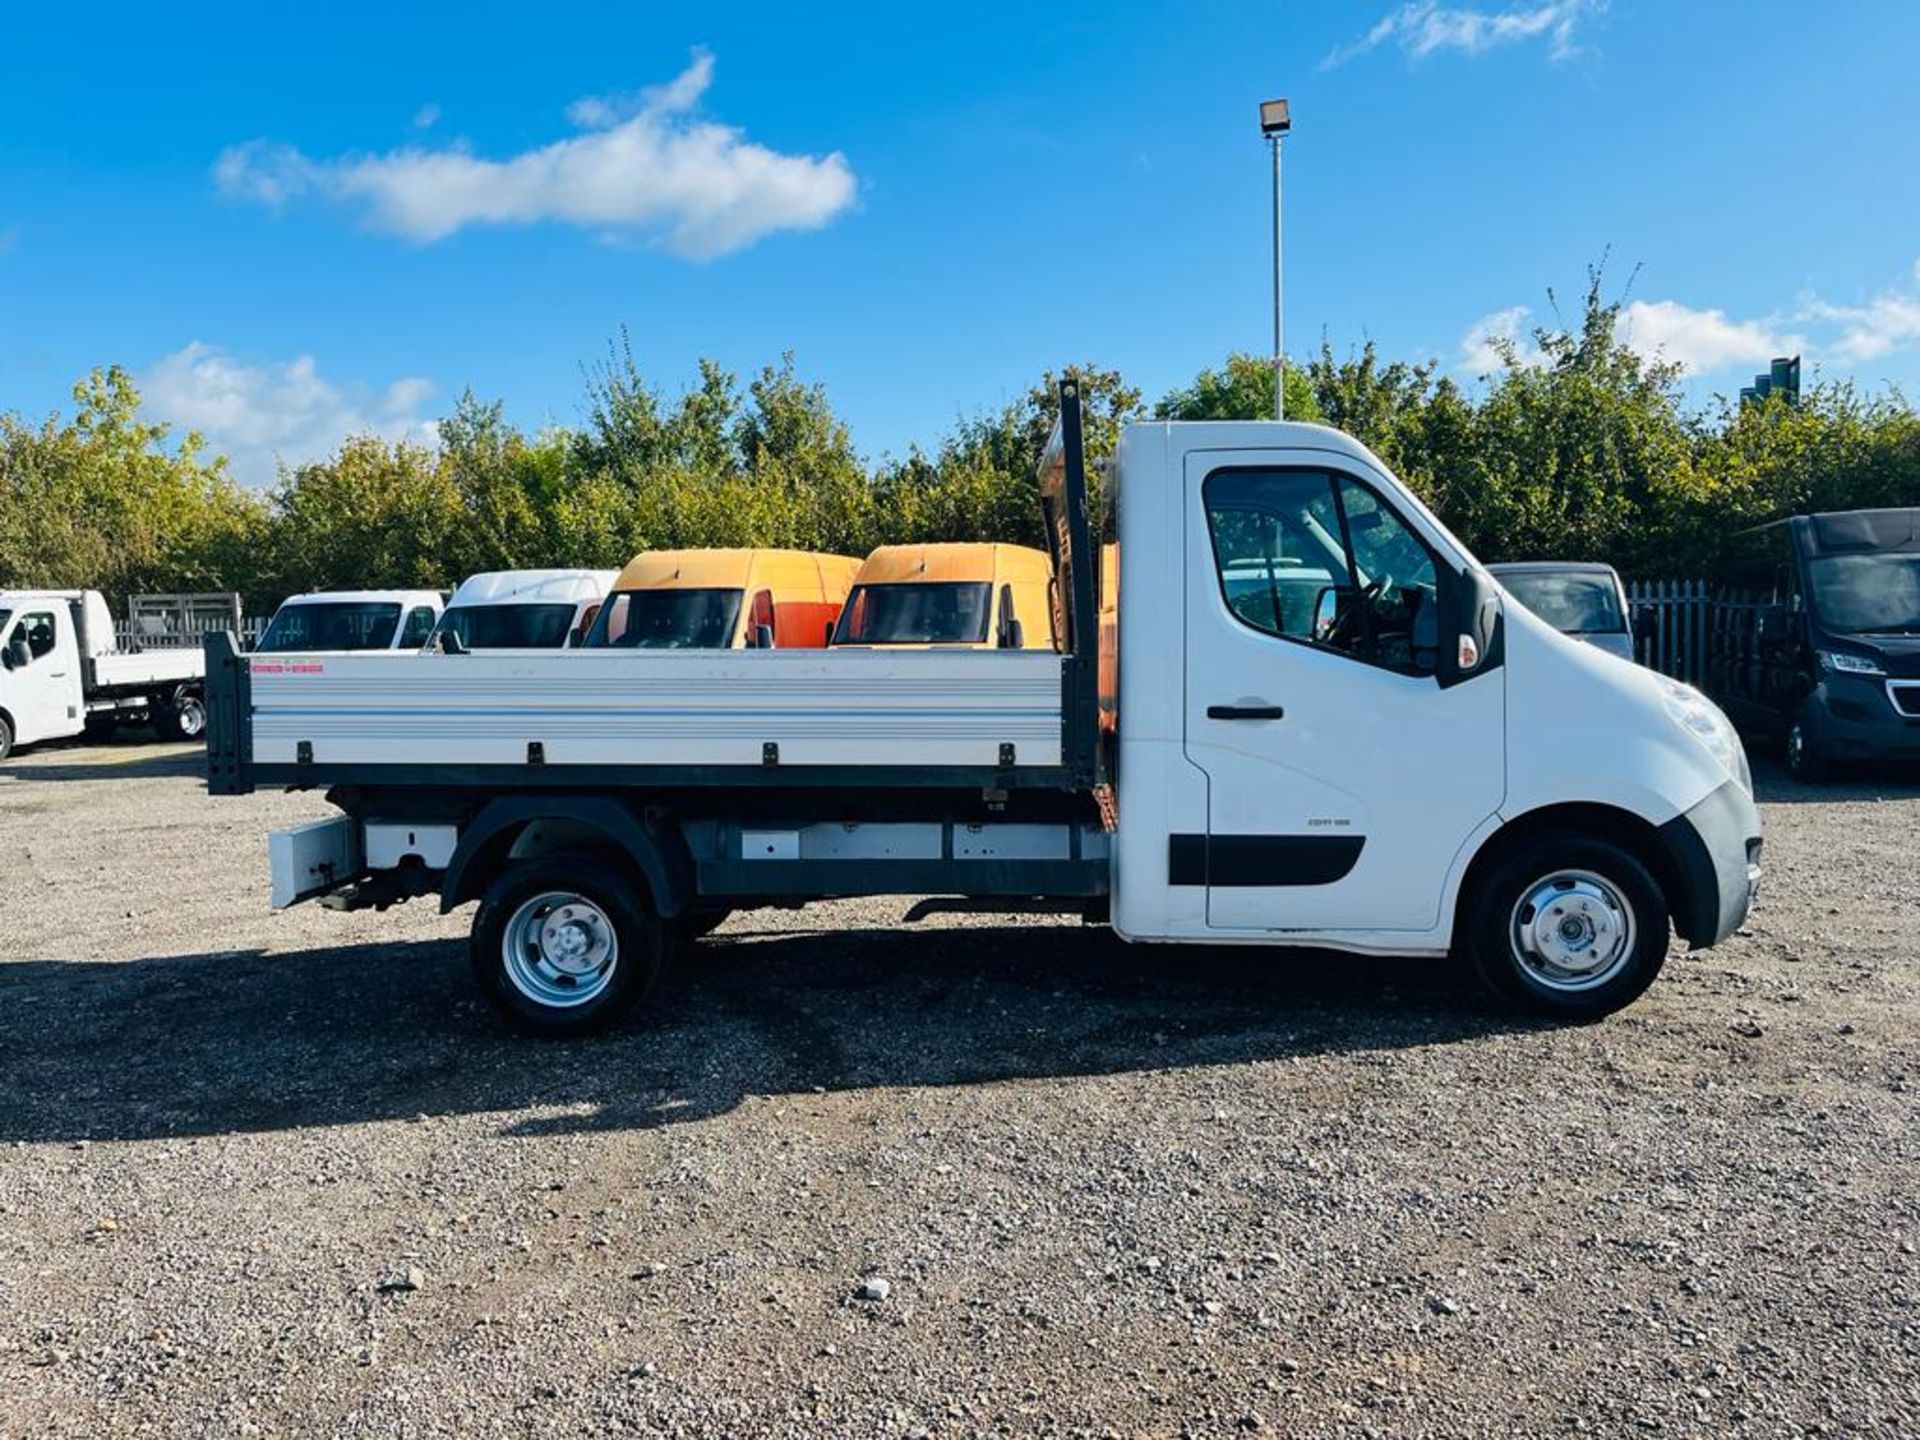 ** ON SALE ** Vauxhall Movano R3500 2.3 CDTI 125 TRW RWD Tipper 2014 '14 Reg' Only 94,206 Miles - Image 6 of 30